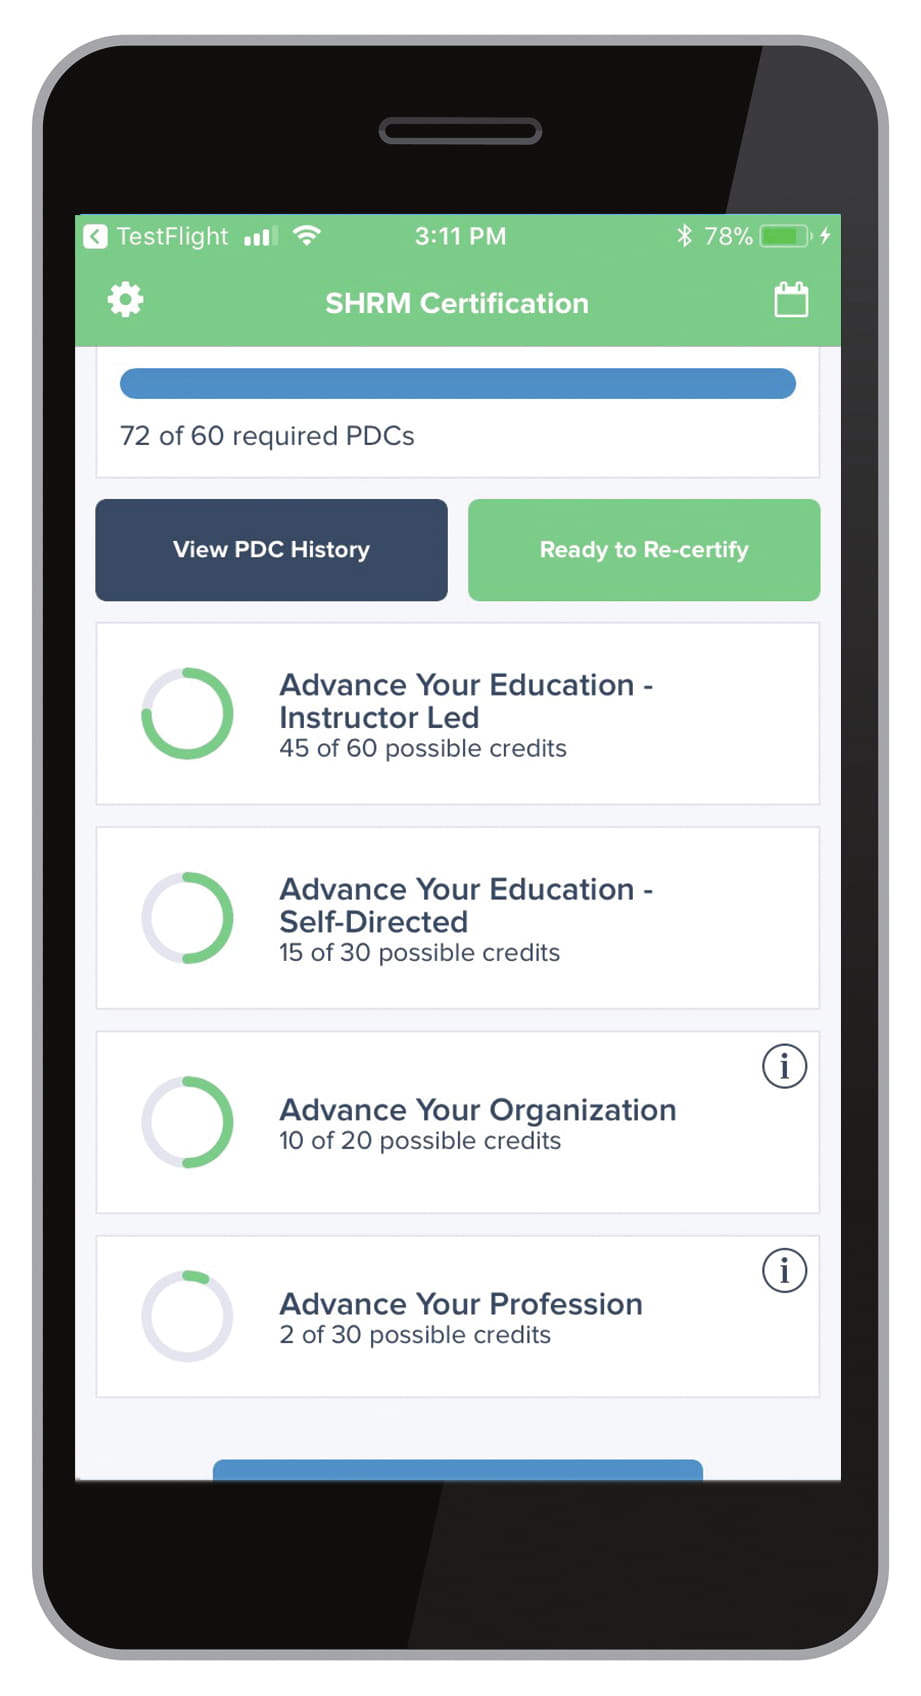 Image of the SHRM Certification app on an iPhone.